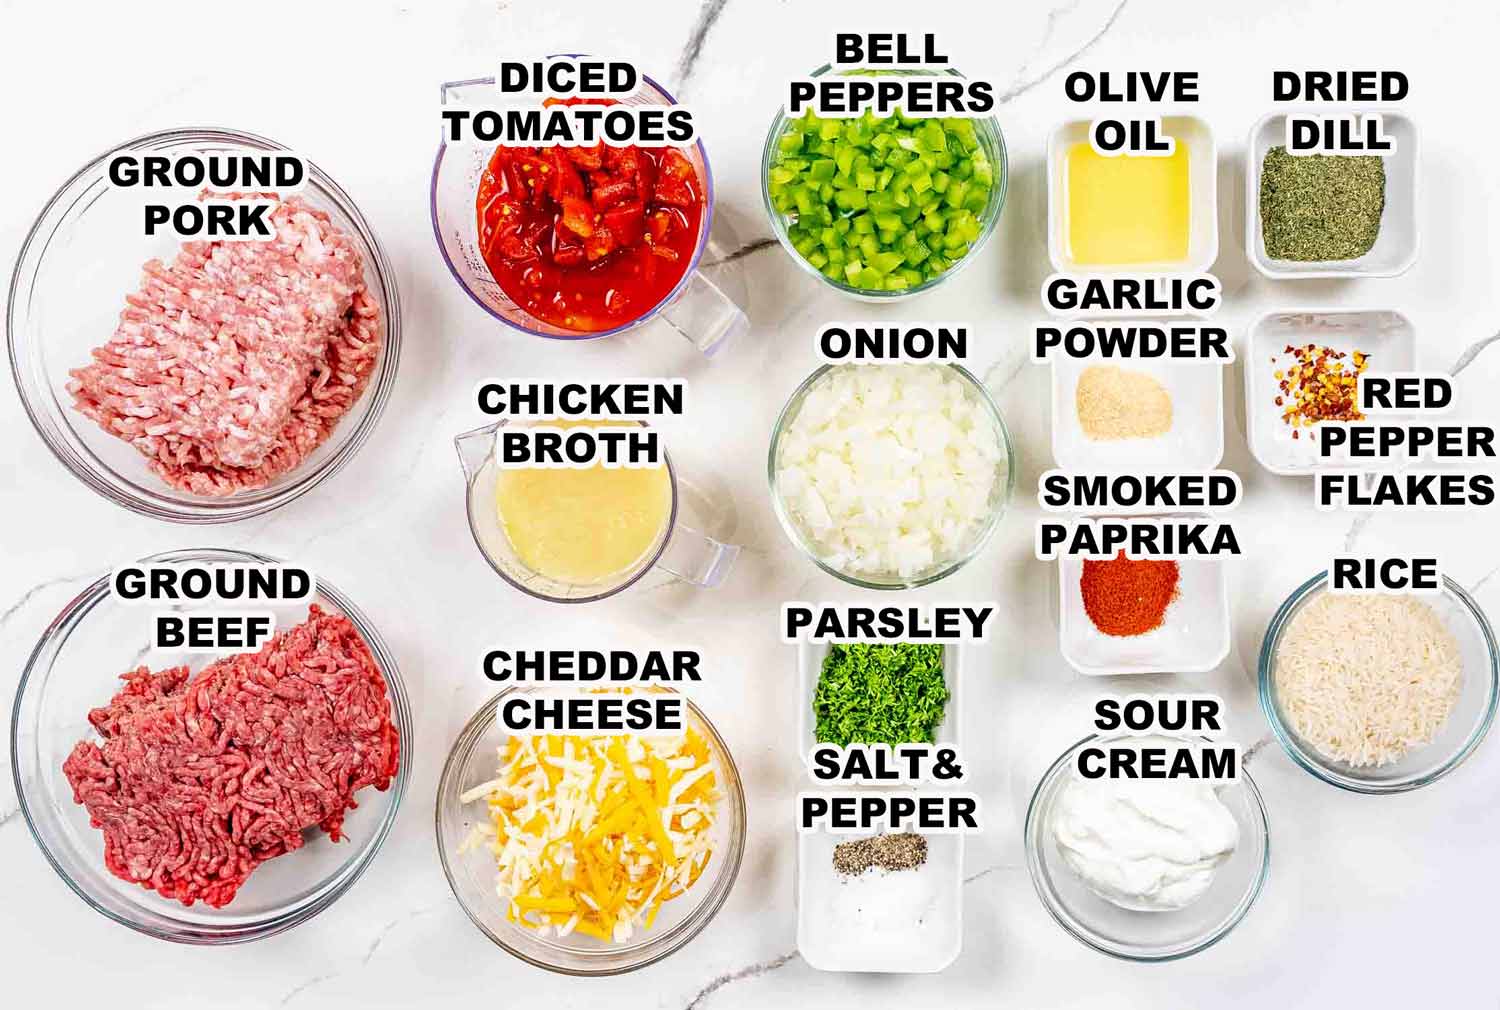 ingredients needed to make deconstructed stuffed pepper casserole.